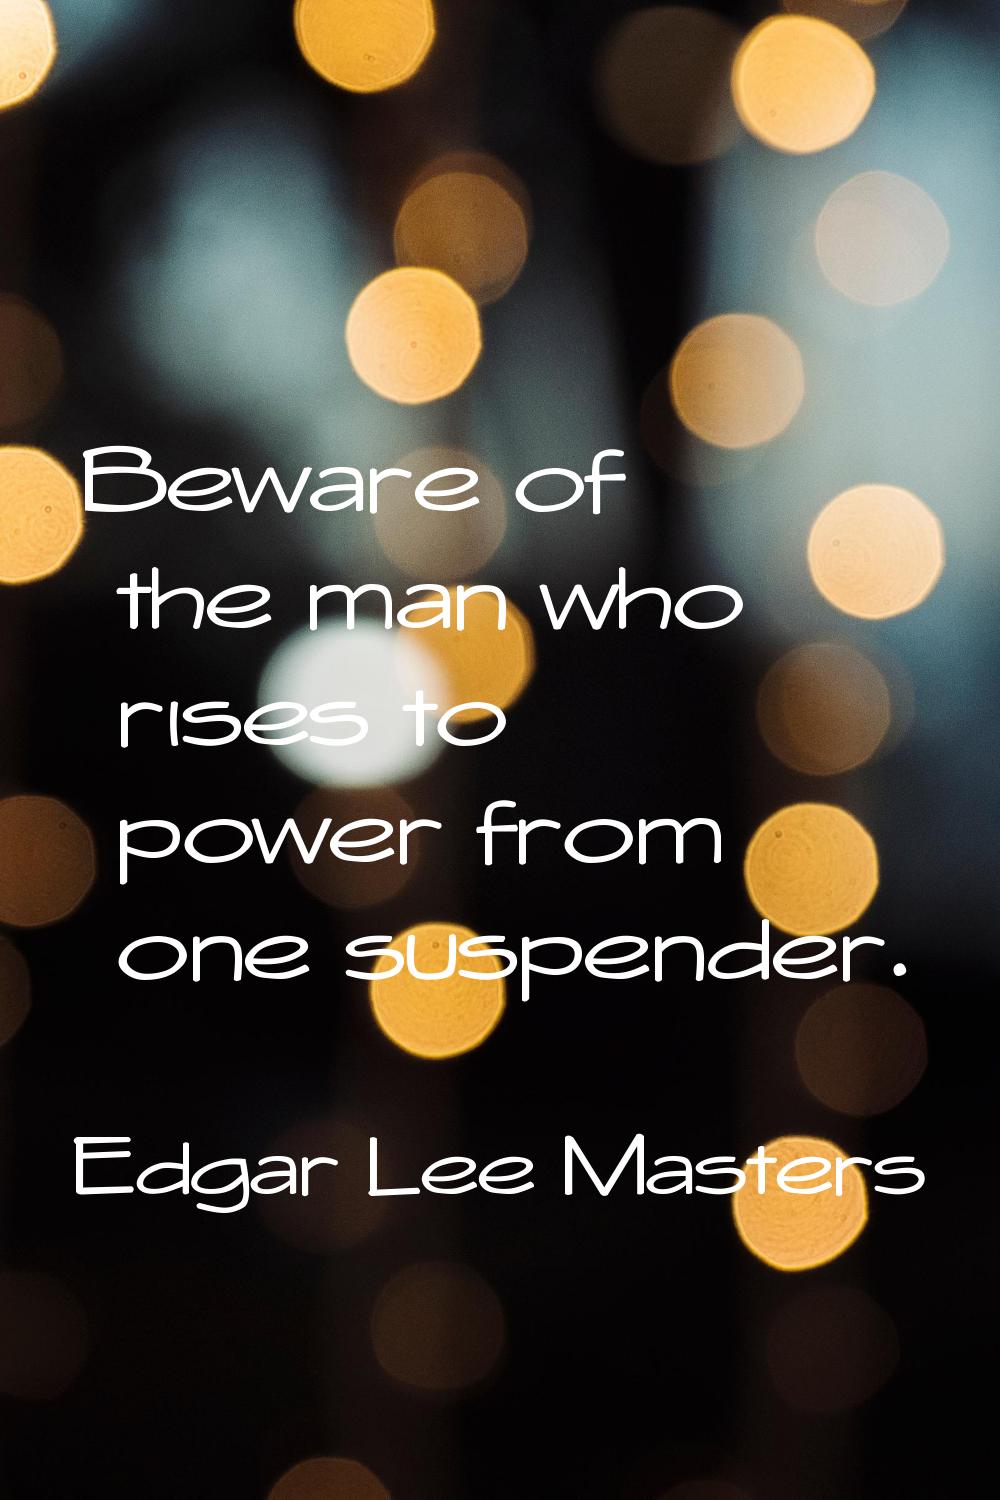 Beware of the man who rises to power from one suspender.